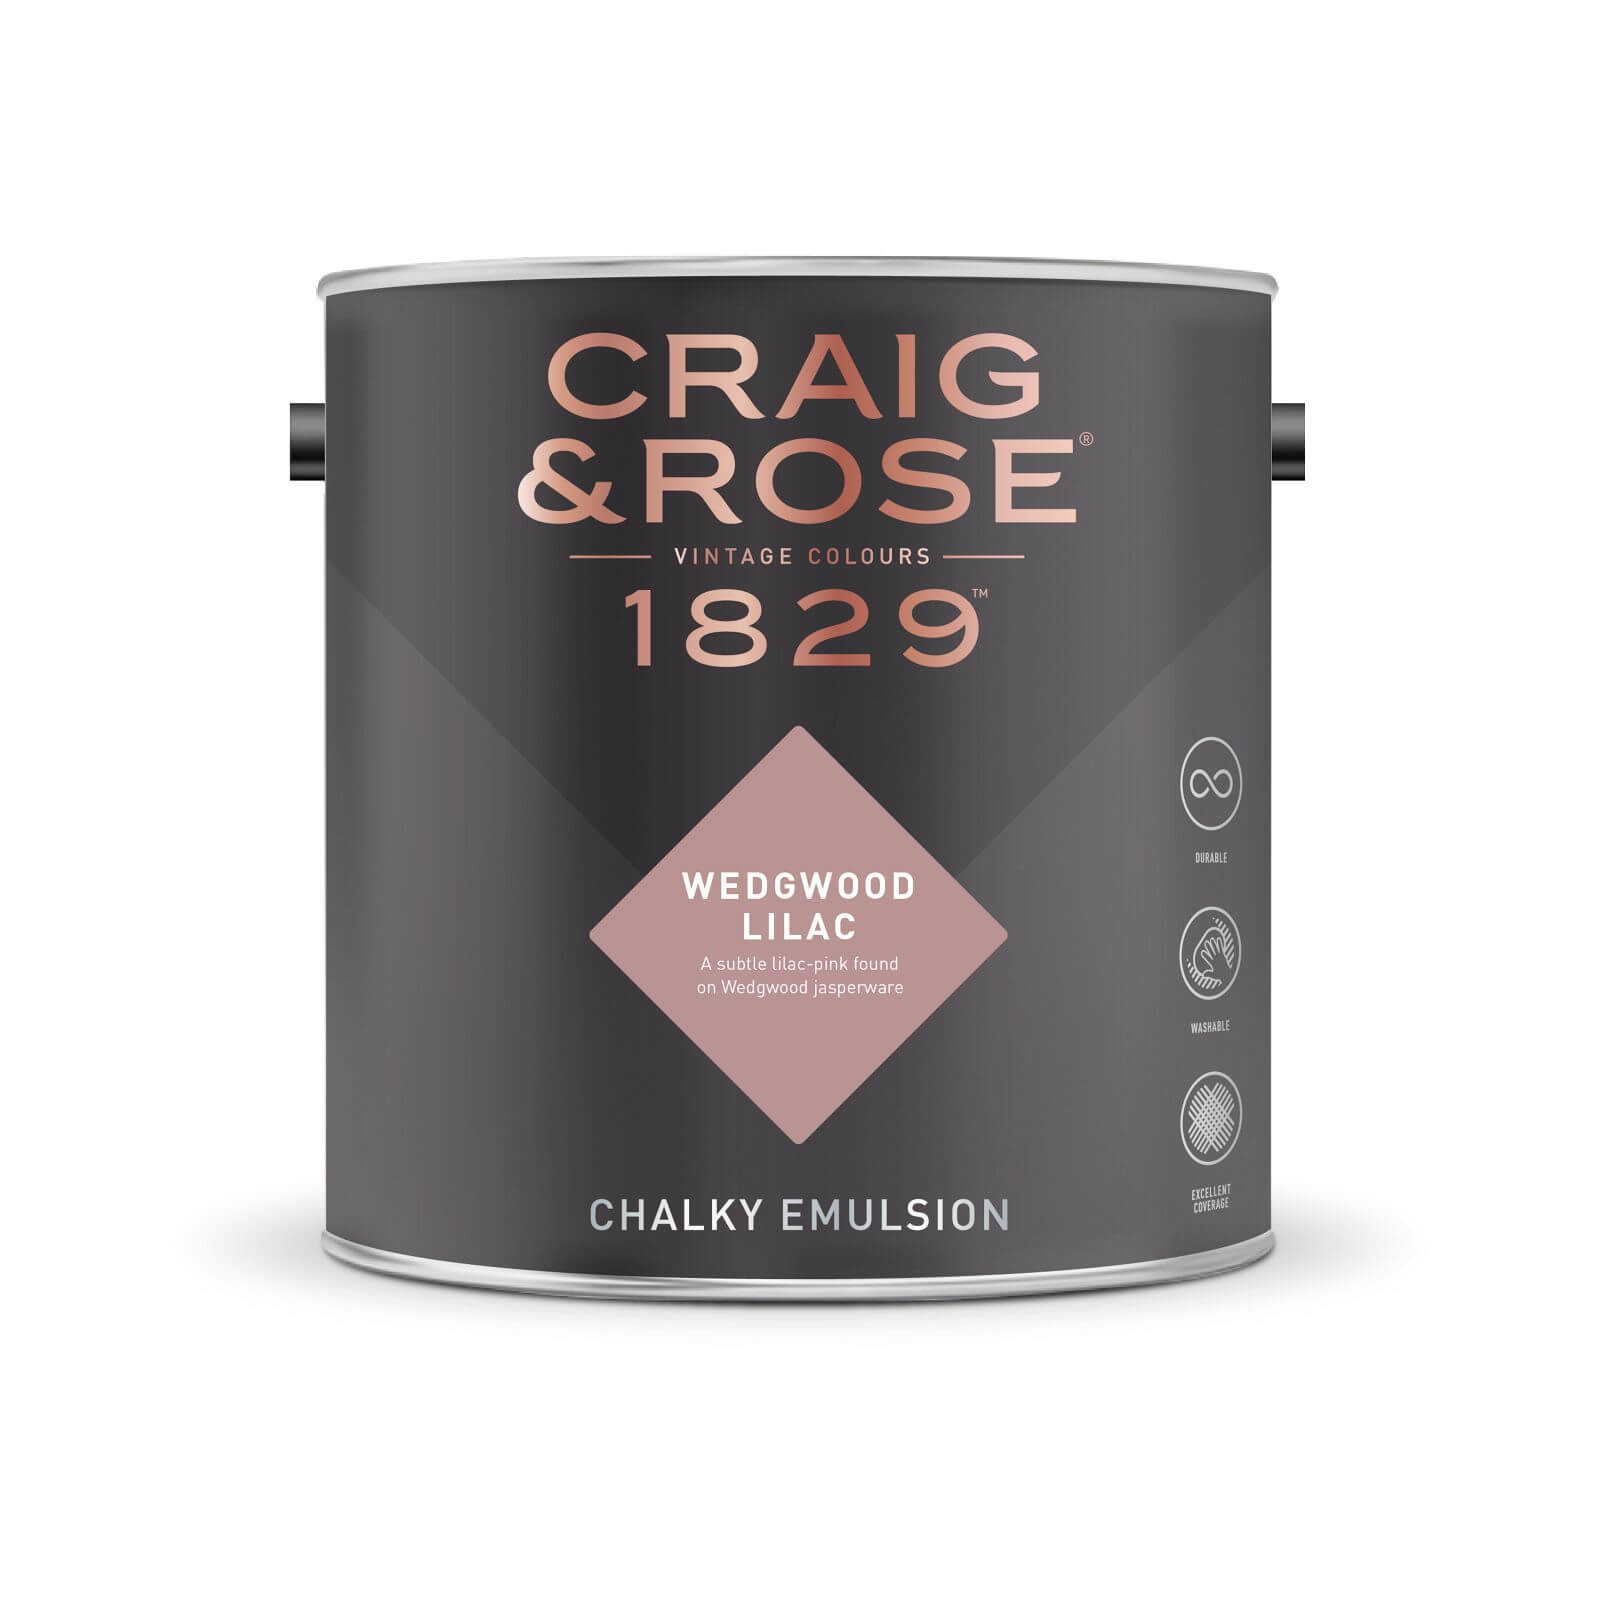 Craig & Rose 1829 Chalky Emulsion Paint Wedgwood Lilac - Tester 50ml